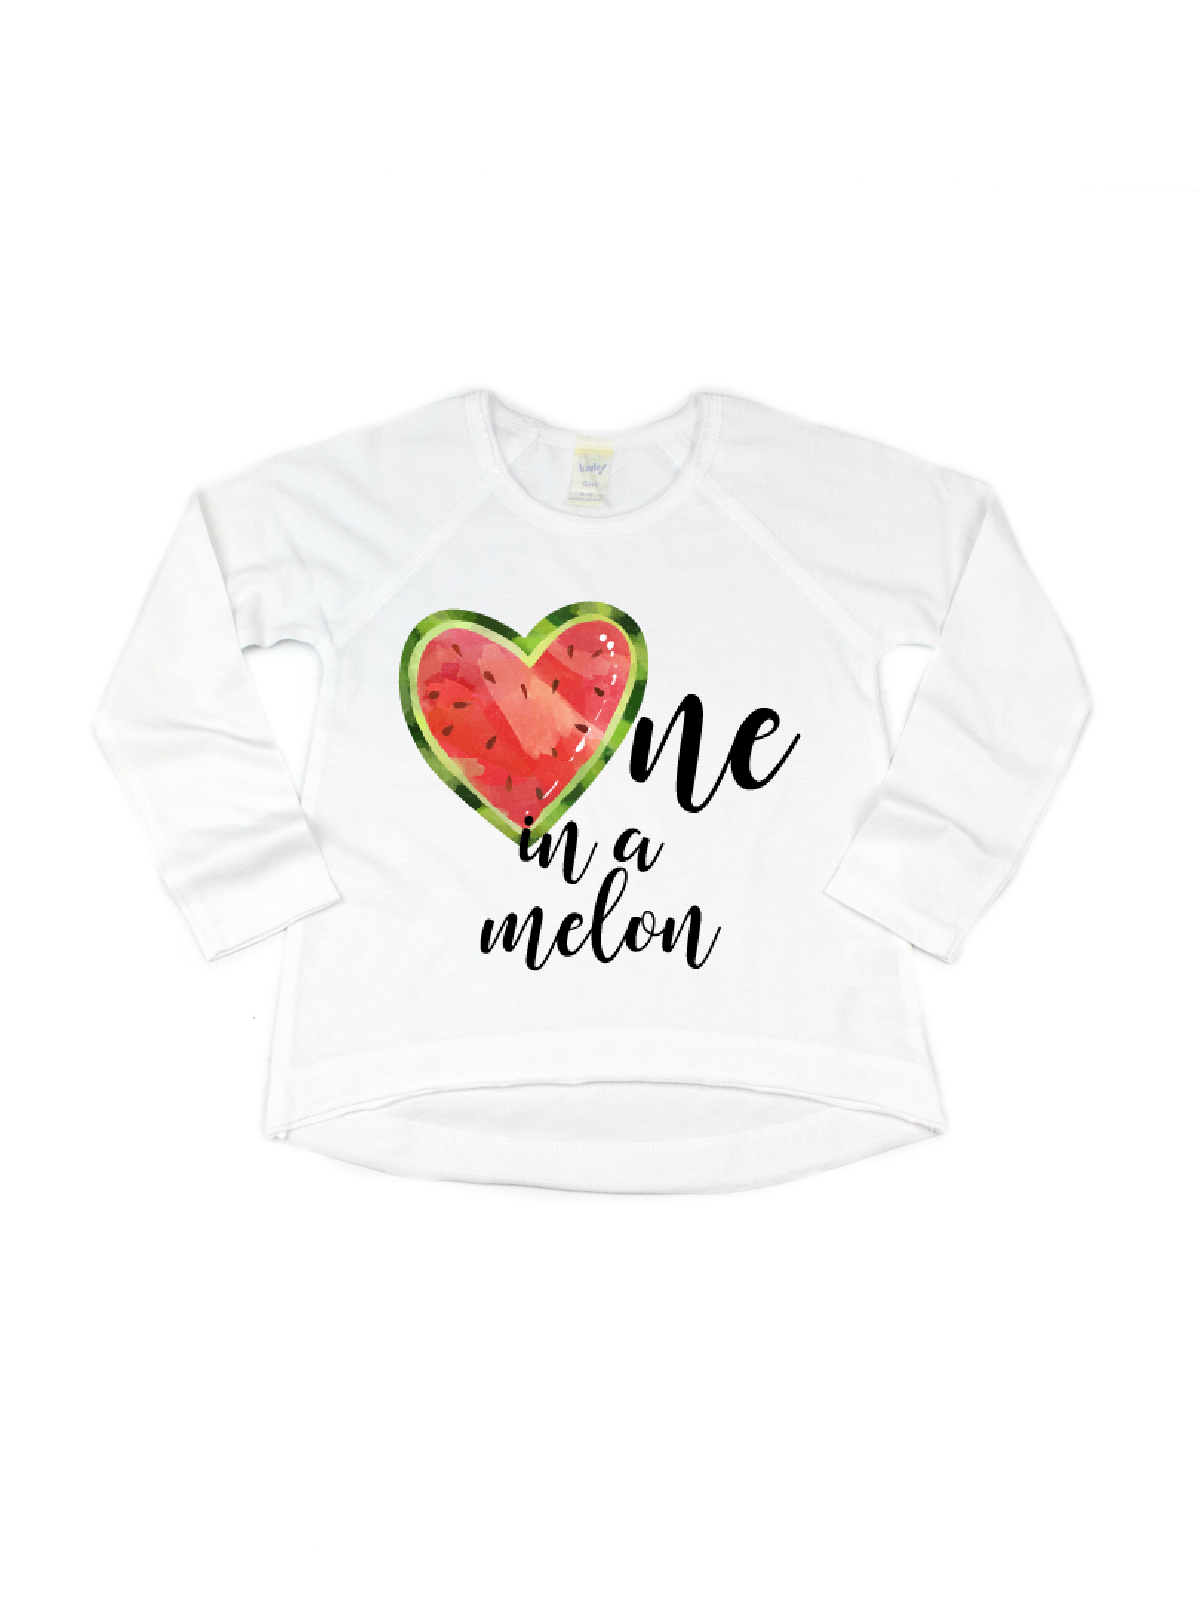 one in a melon long sleeve shirt for girls